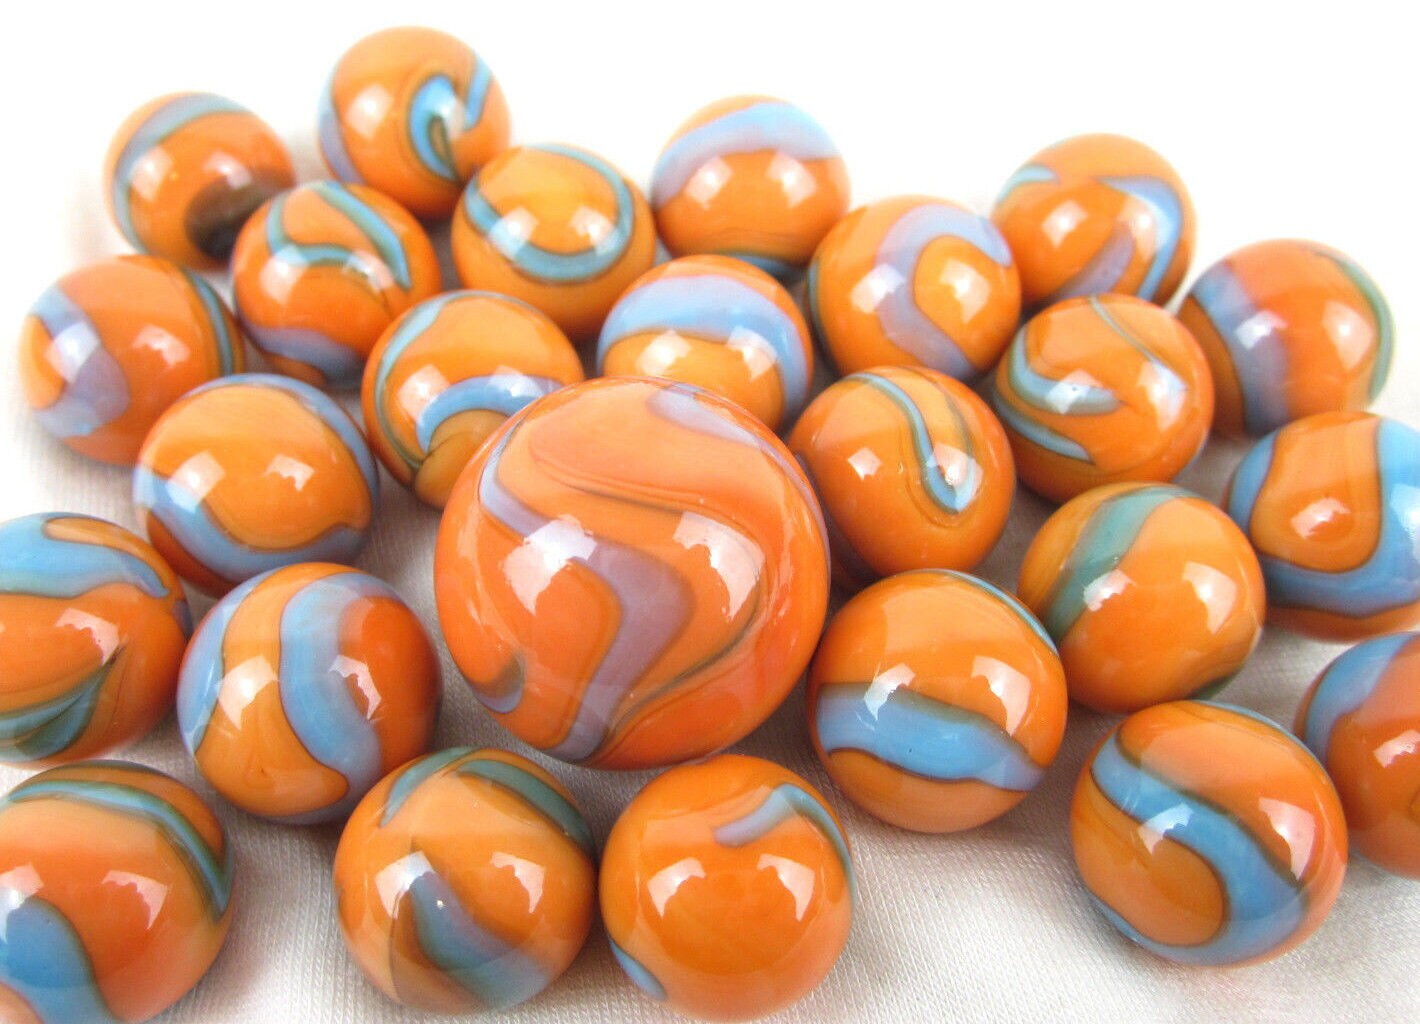 25 Glass Marbles SEAHORSE Orange/Blue Classic vtg Style Game Pack Shooter Swirl